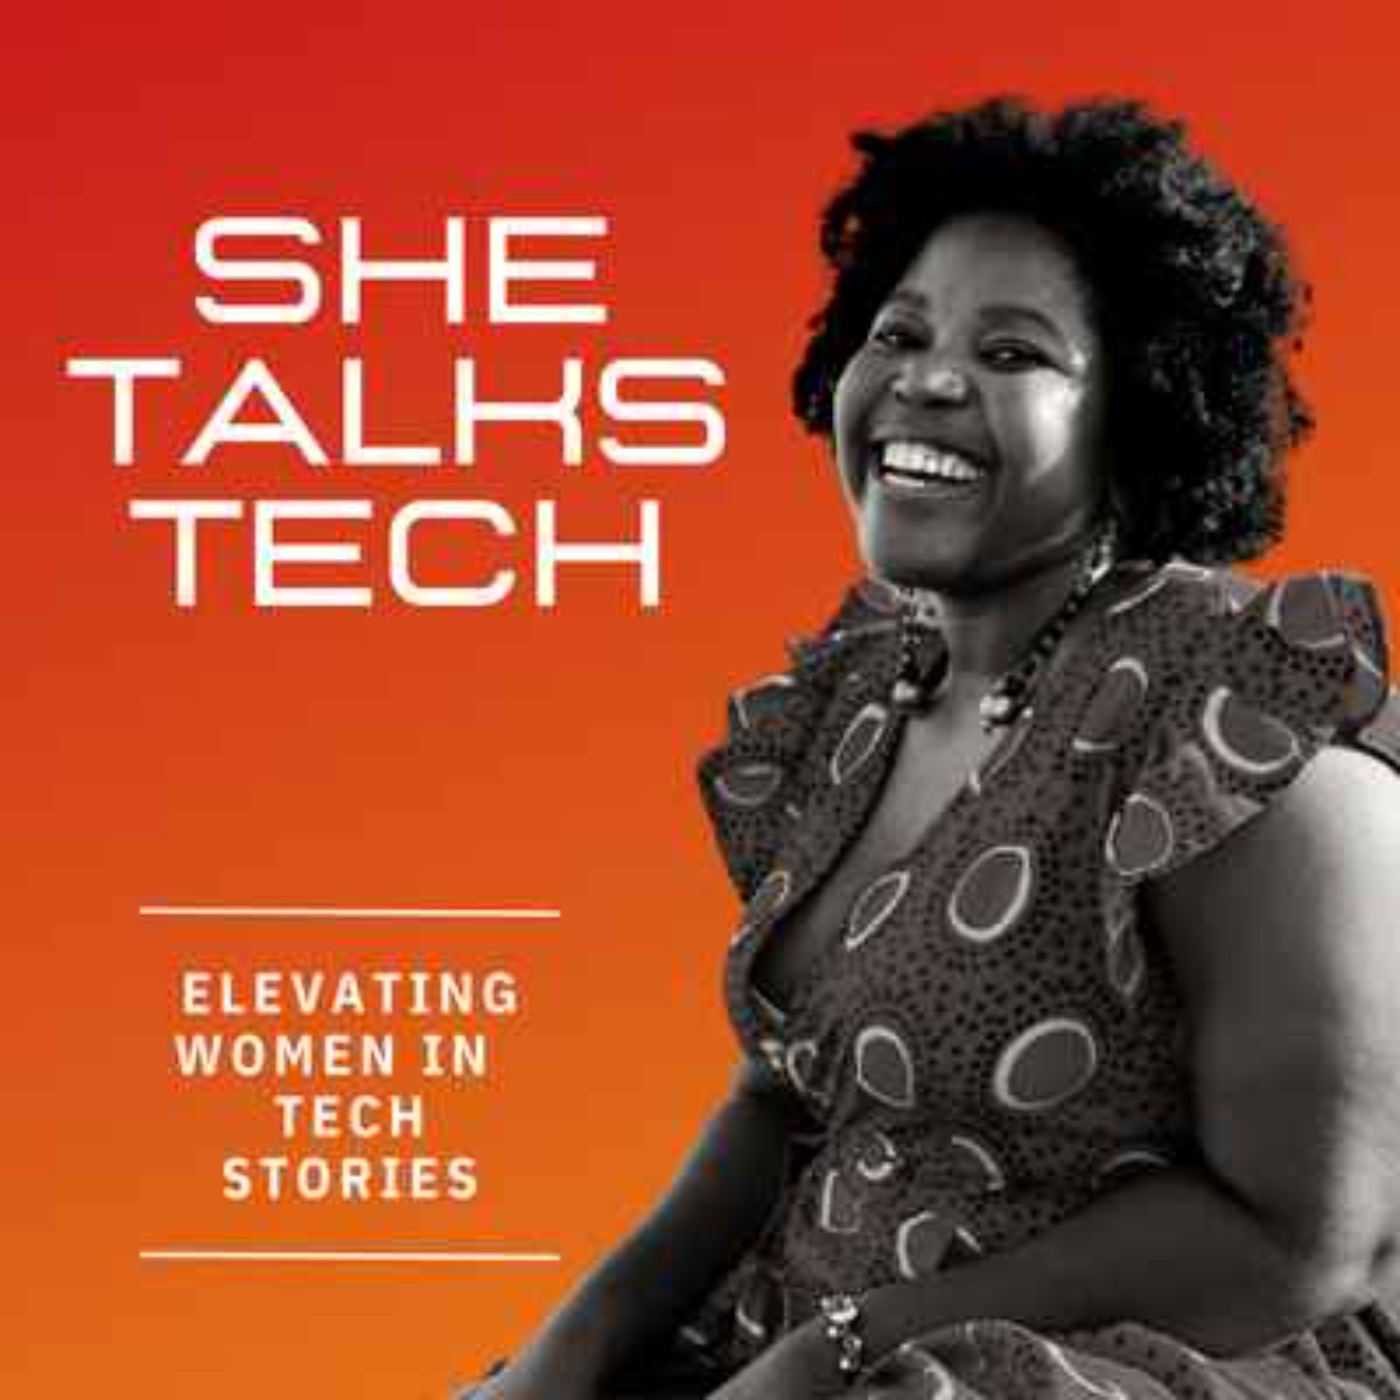 12 - How to thrive as a Women in Tech with Kutlwano Kemisho